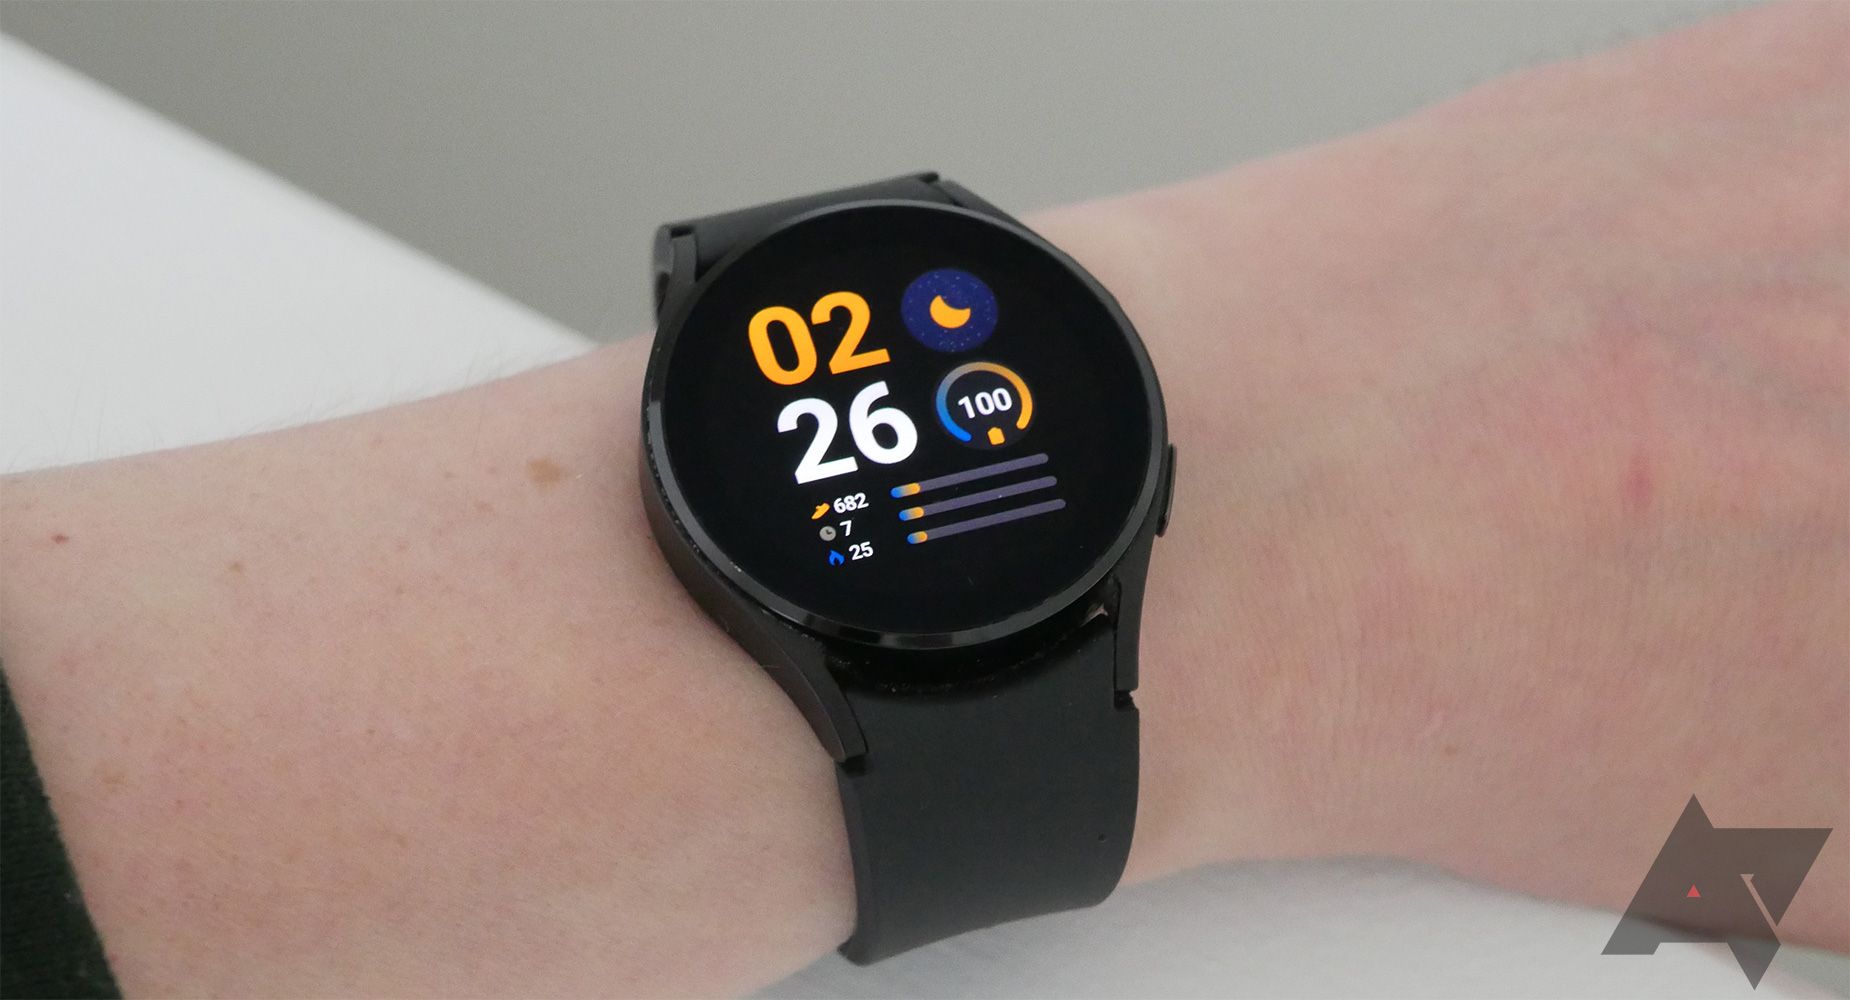 A smart watch with a colorful watch face.